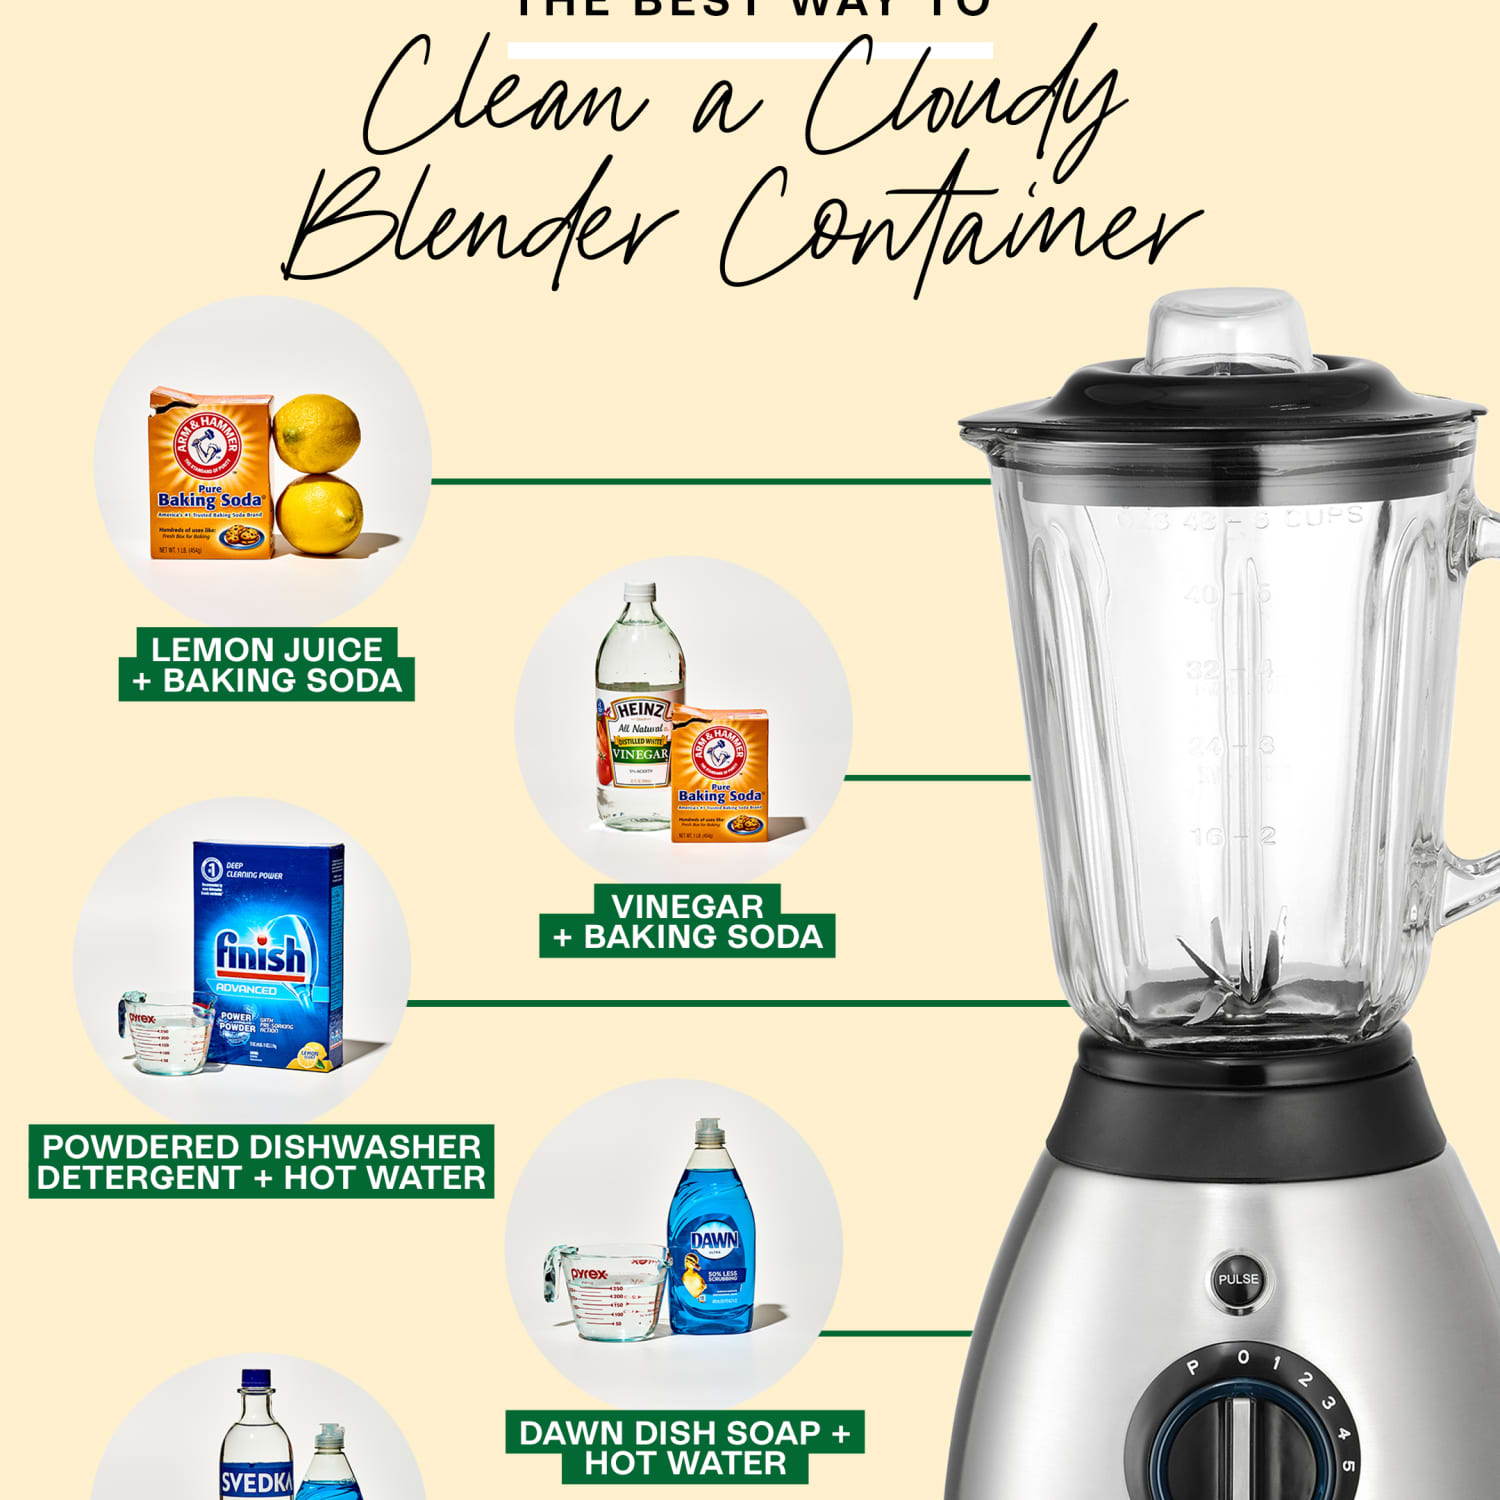 https://cdn.apartmenttherapy.info/image/upload/f_jpg,q_auto:eco,c_fill,g_auto,w_1500,ar_1:1/k%2FPhoto%2FSeries%2F2022-02_Cleaning-Showdown_Cloudy-Blender-Carafe%2FCleaningShowdown-blender